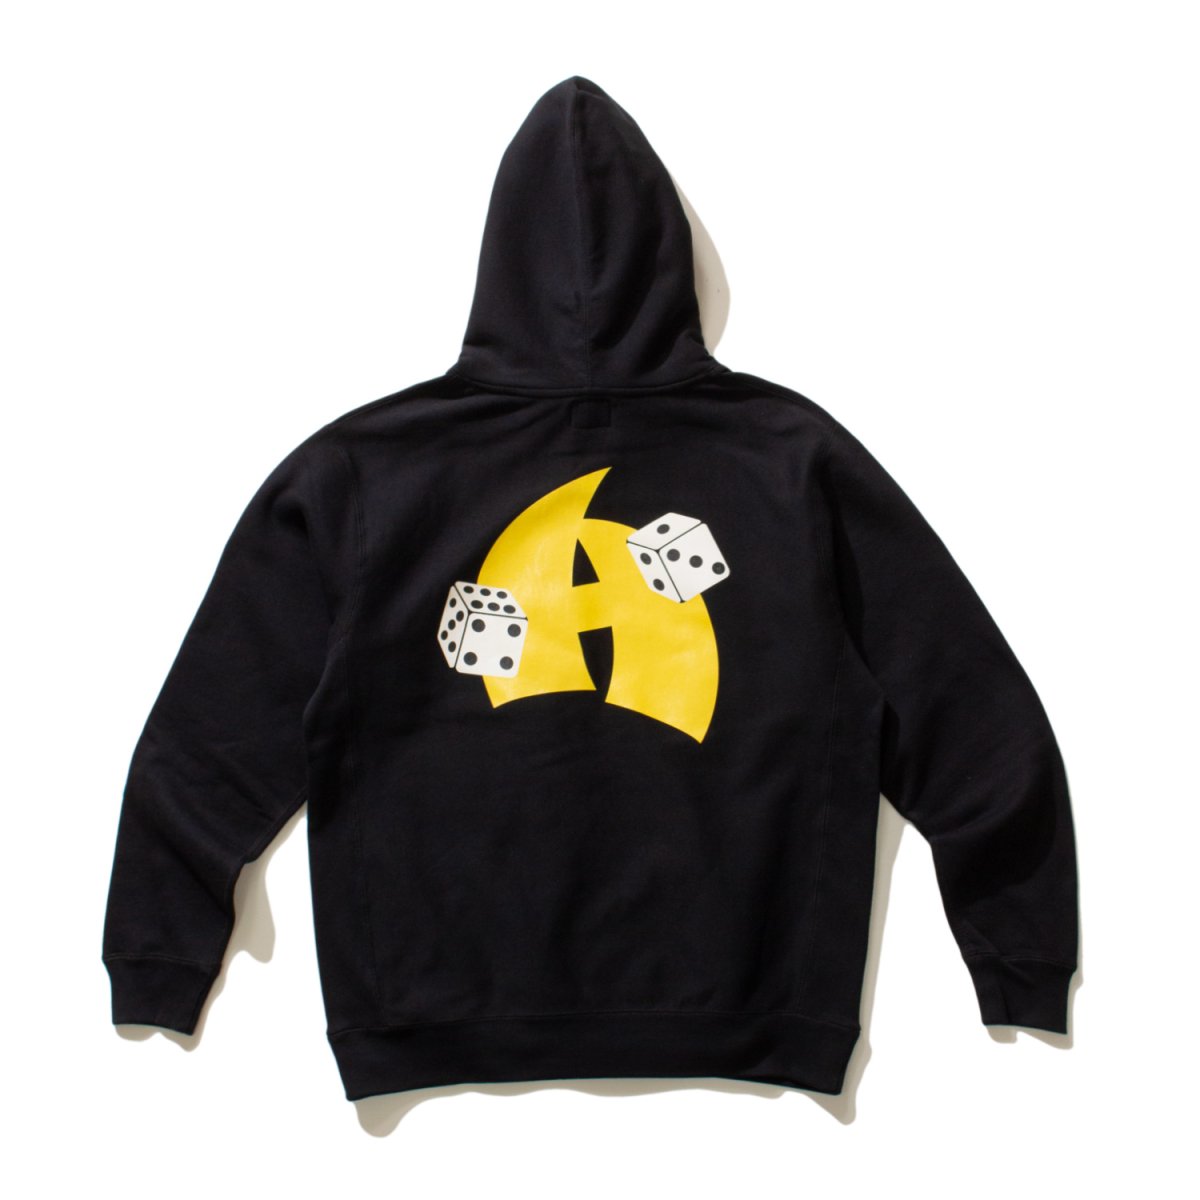 ACAPULCO GOLD | GAME OF DEATH HOODED SWEATSHIRT | ACAPULCO GOLD